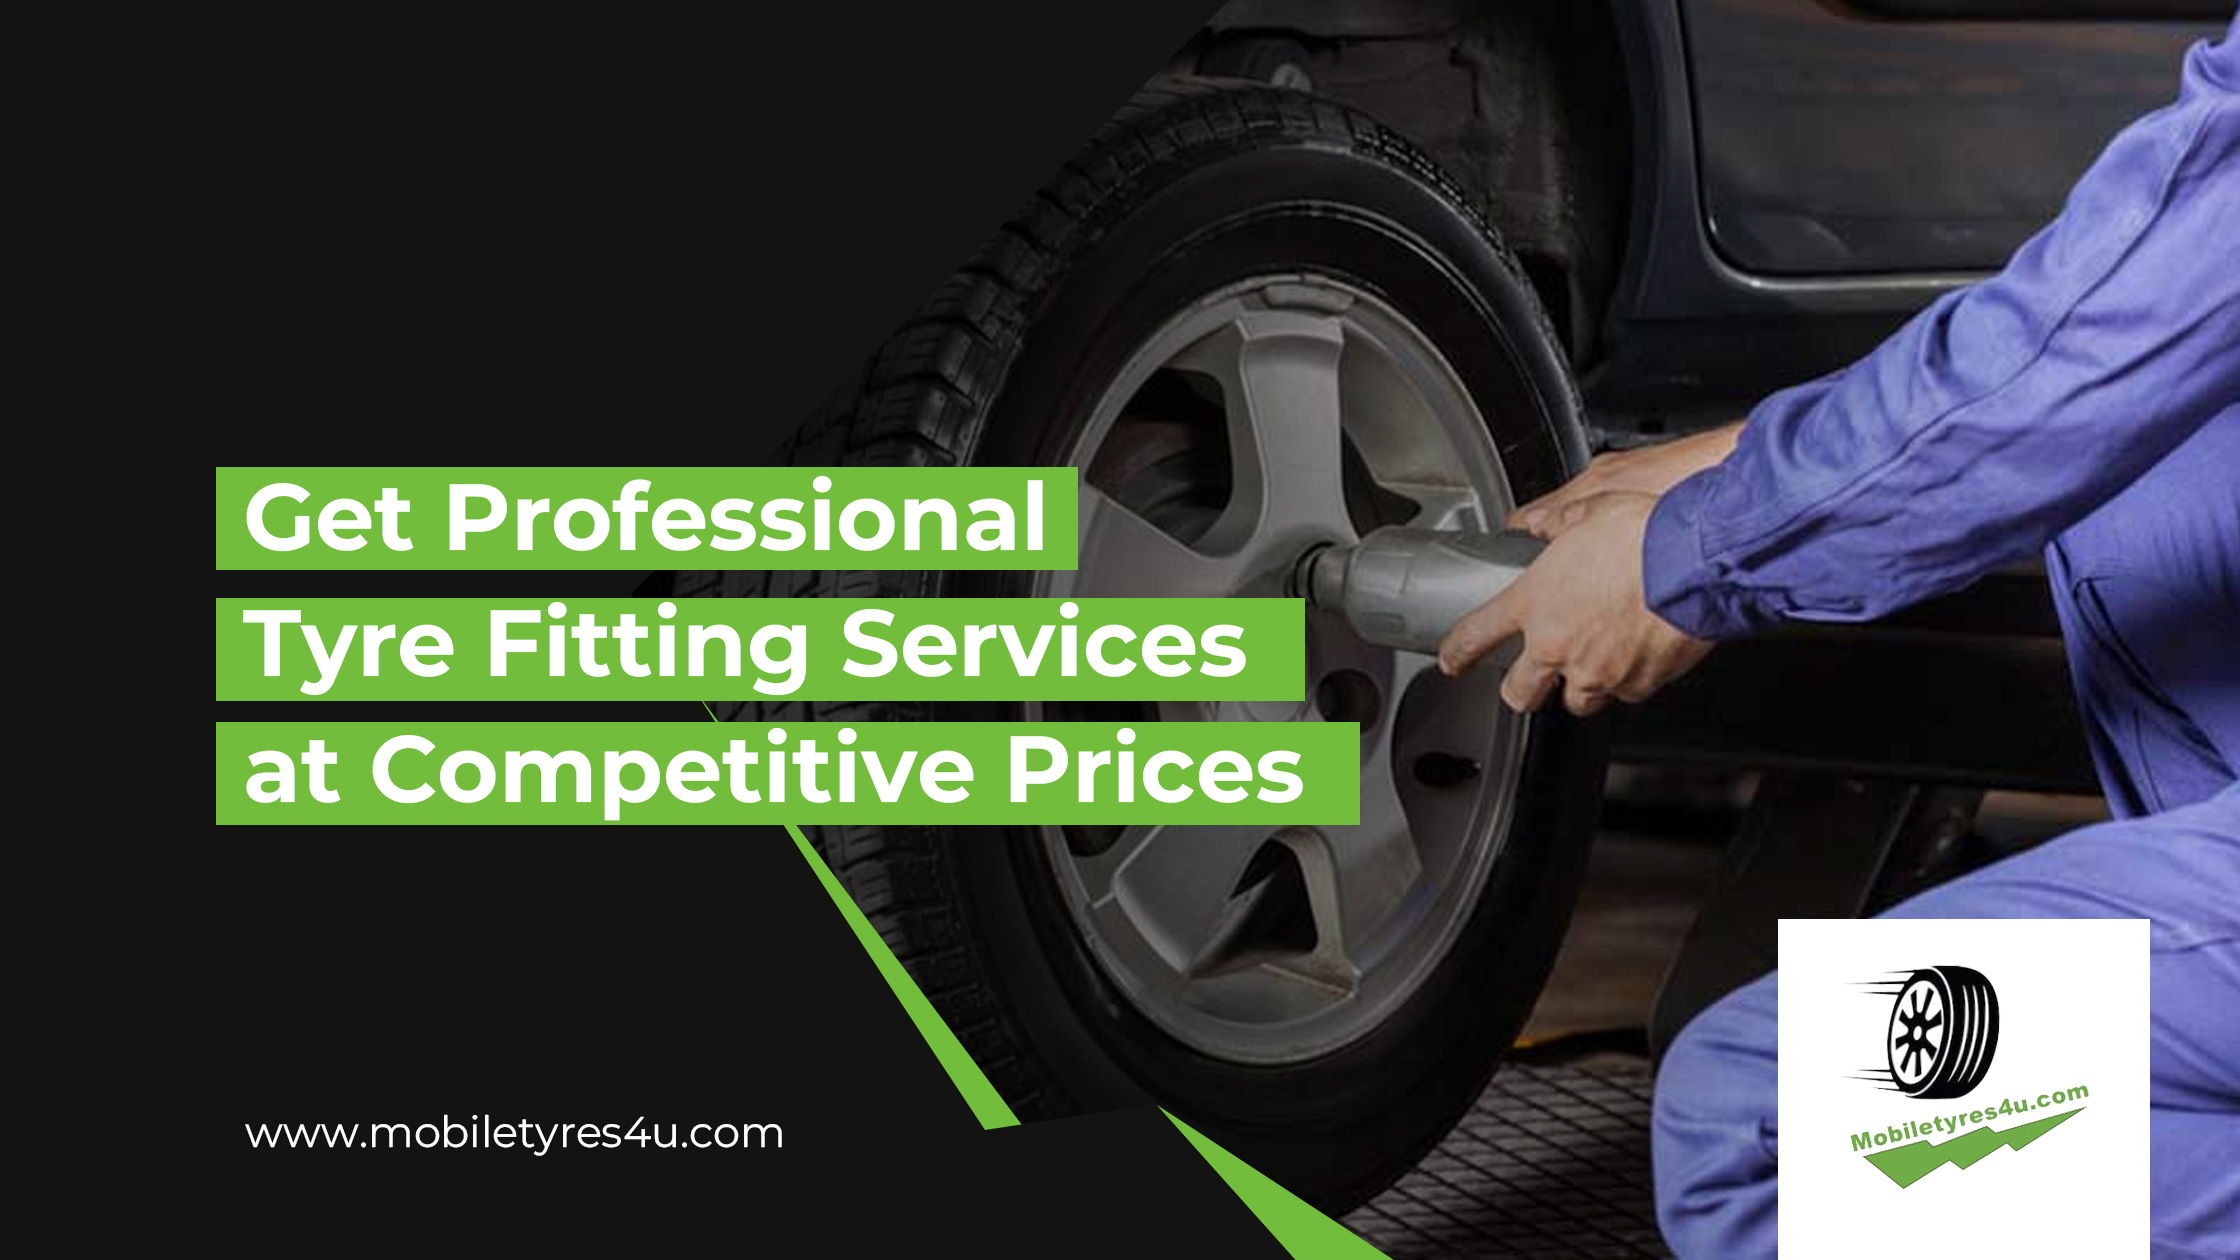 Blog_The Importance of Proper Tyre Fitting: Safety and Performance